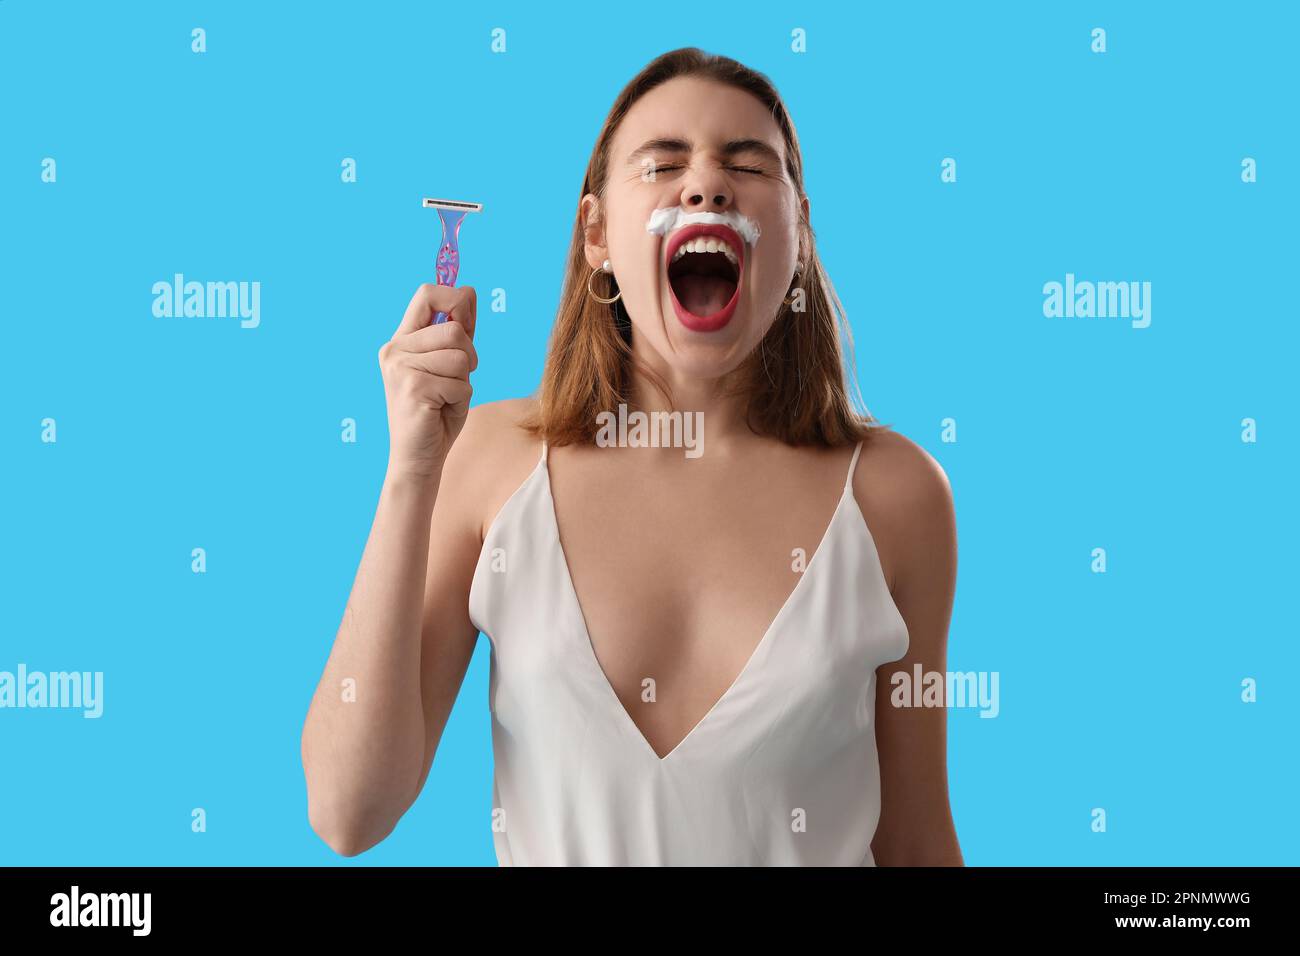 Angry young woman with shaving foam and razor on blue background Stock Photo